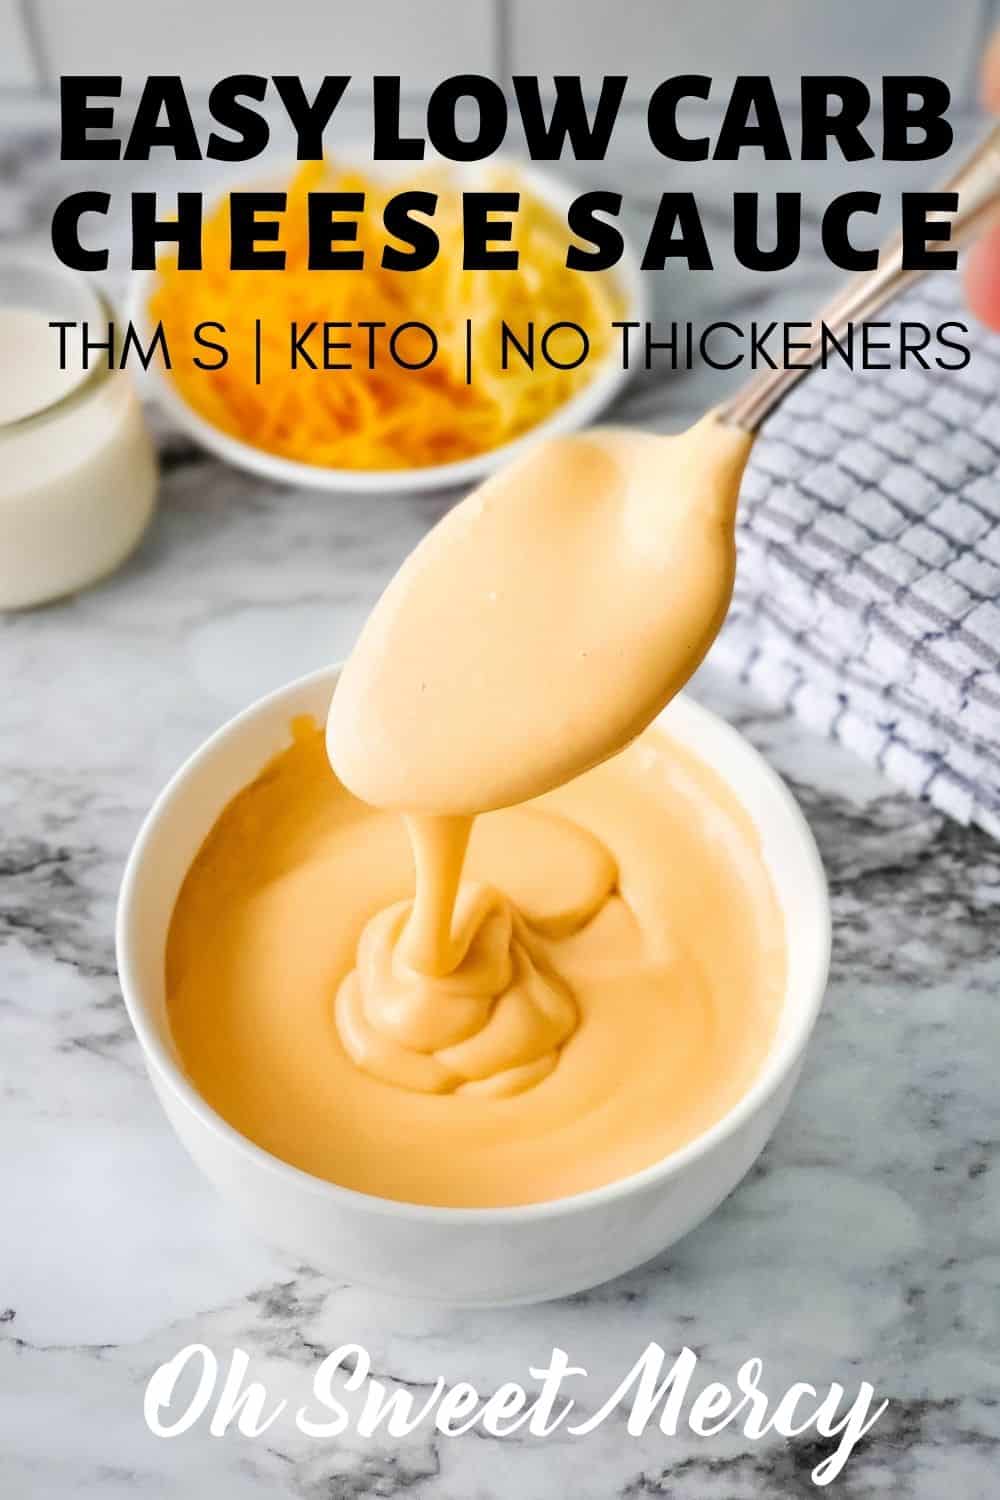 My Easy Low Carb Cheese Sauce takes less than 10 minutes to make, uses no starches or thickeners, and is 100% THM and keto friendly. No heavy cream, either! Perfect for casseroles, veggies, dips, or wherever you need low carb cheesy goodness. #lowcarb #keto #glutenfree #cheesesauce #thm @ohsweetmercy